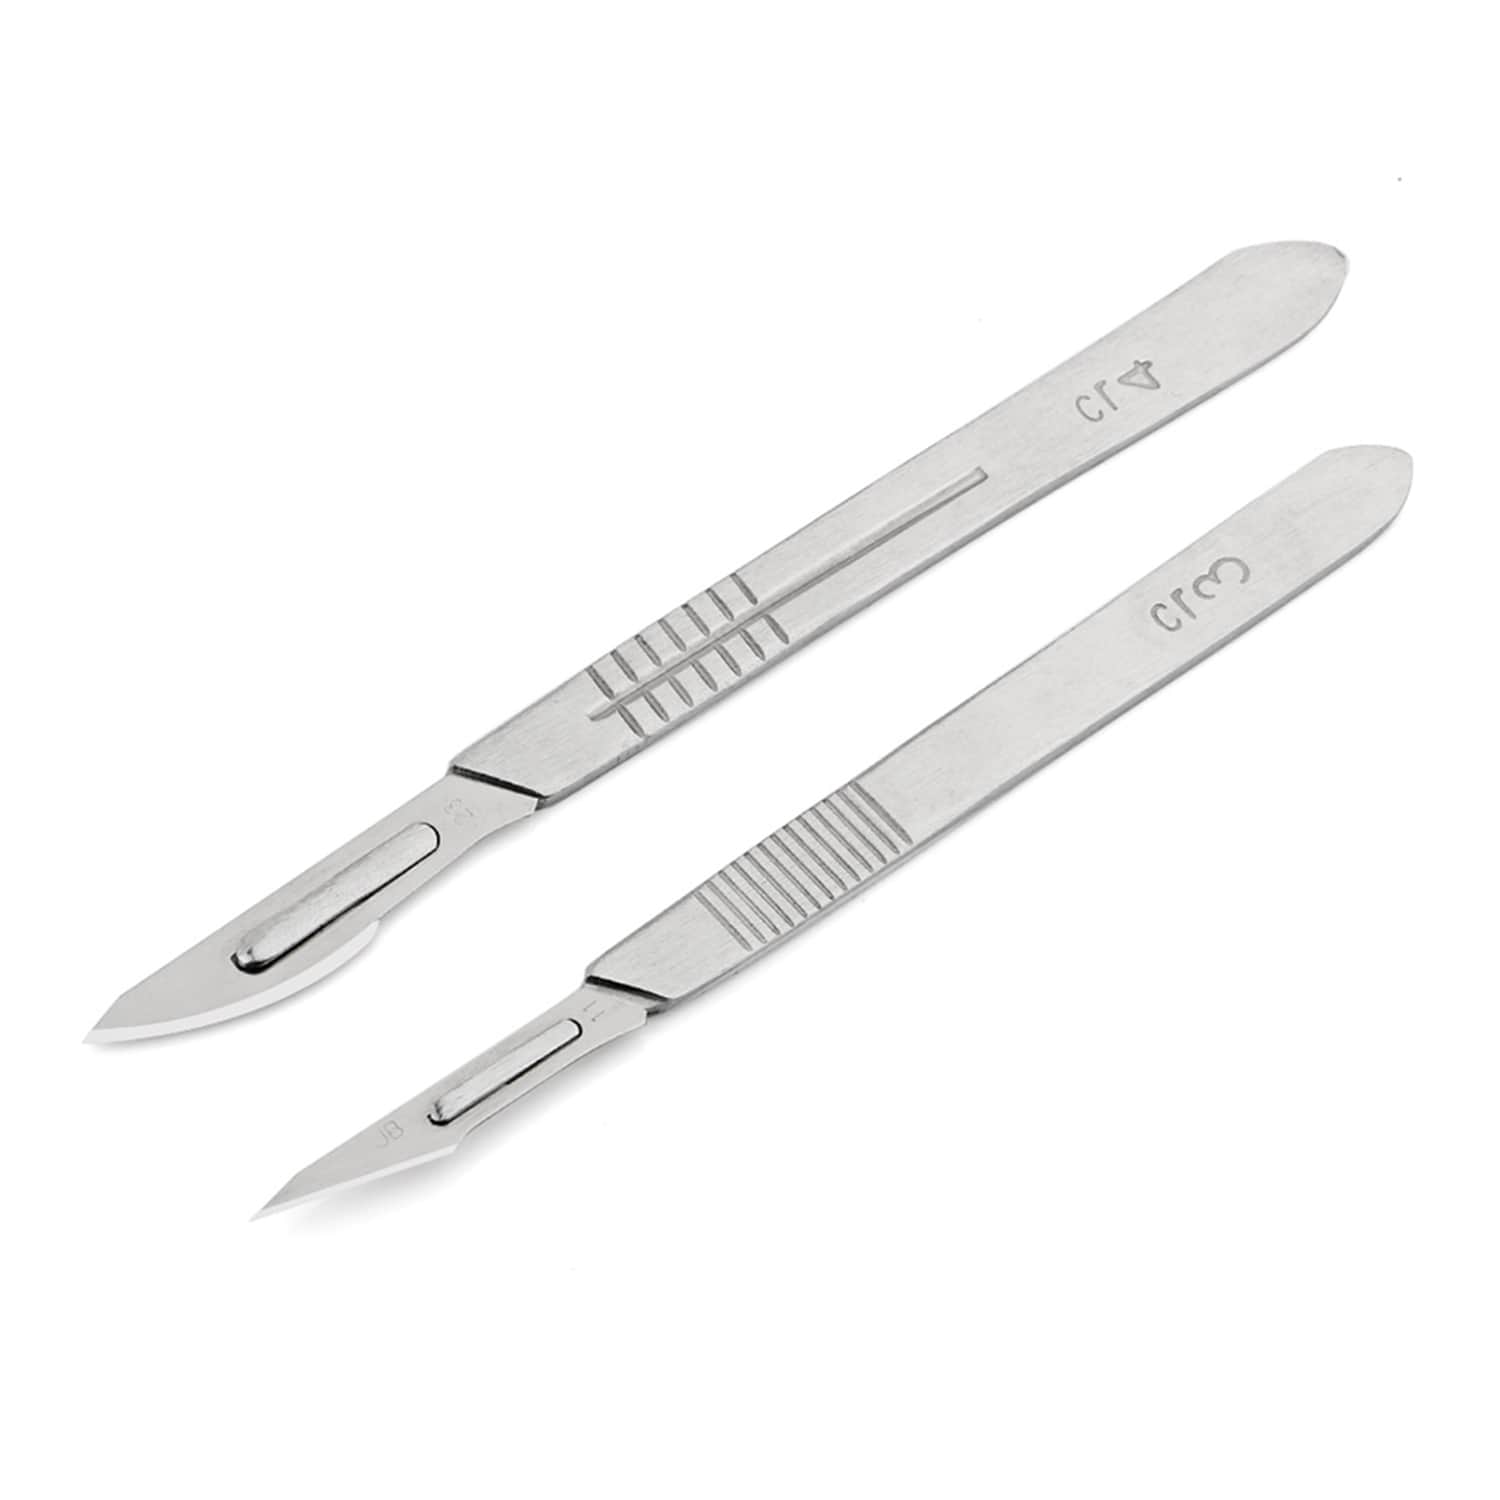 SUPER-HARD STAINLESS STEEL SURGICAL BLADES TOOLS